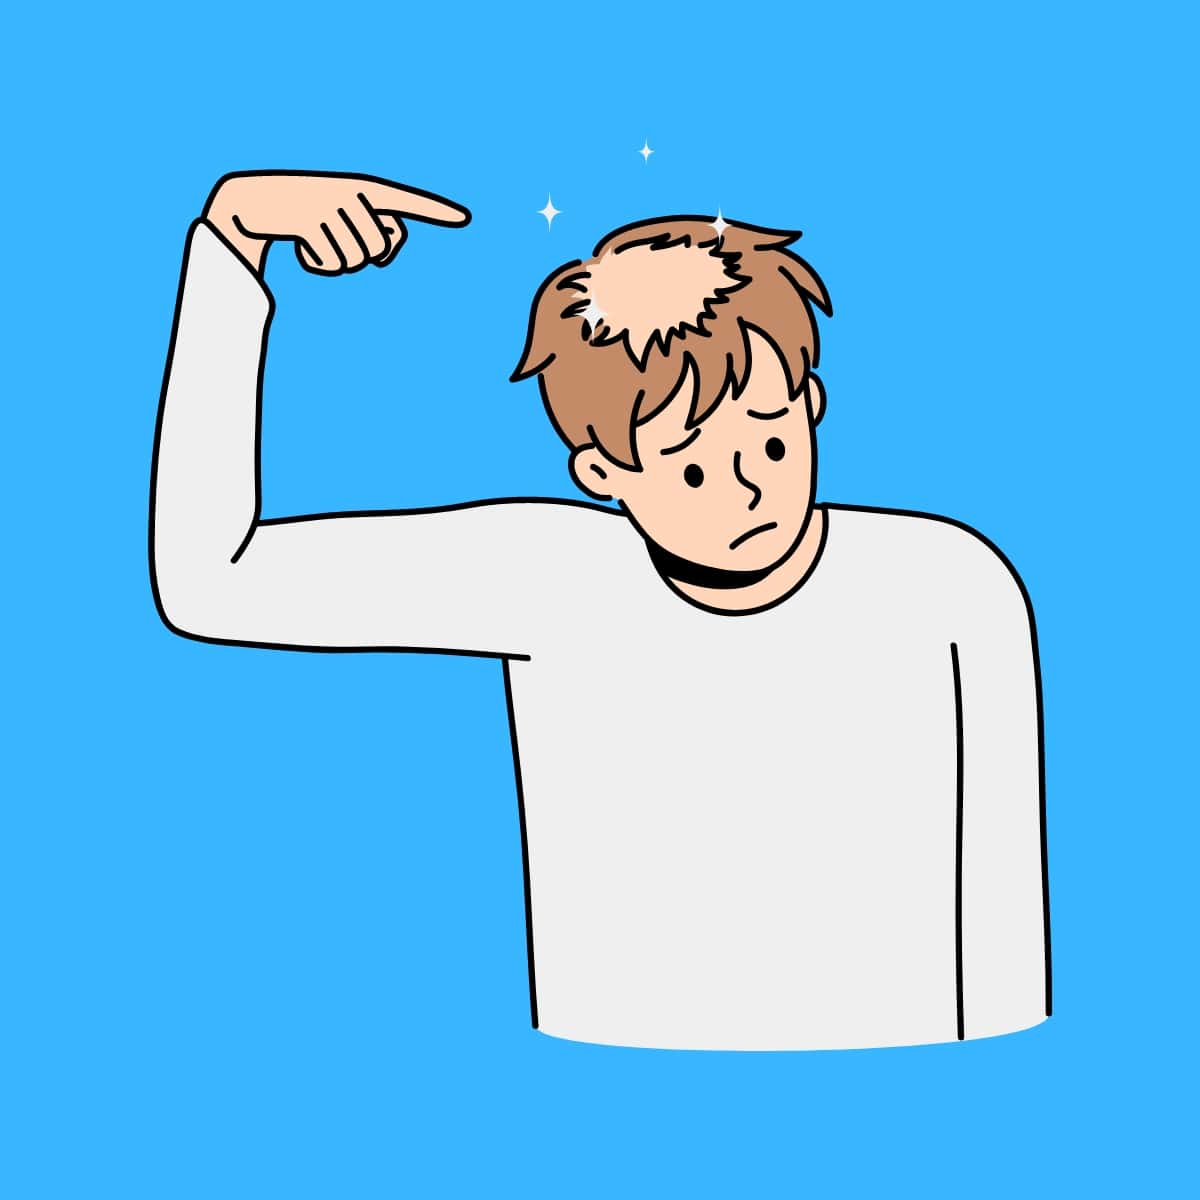 Cartoon graphic of a man pointing to a bald spot on the top of his head on a blue background.